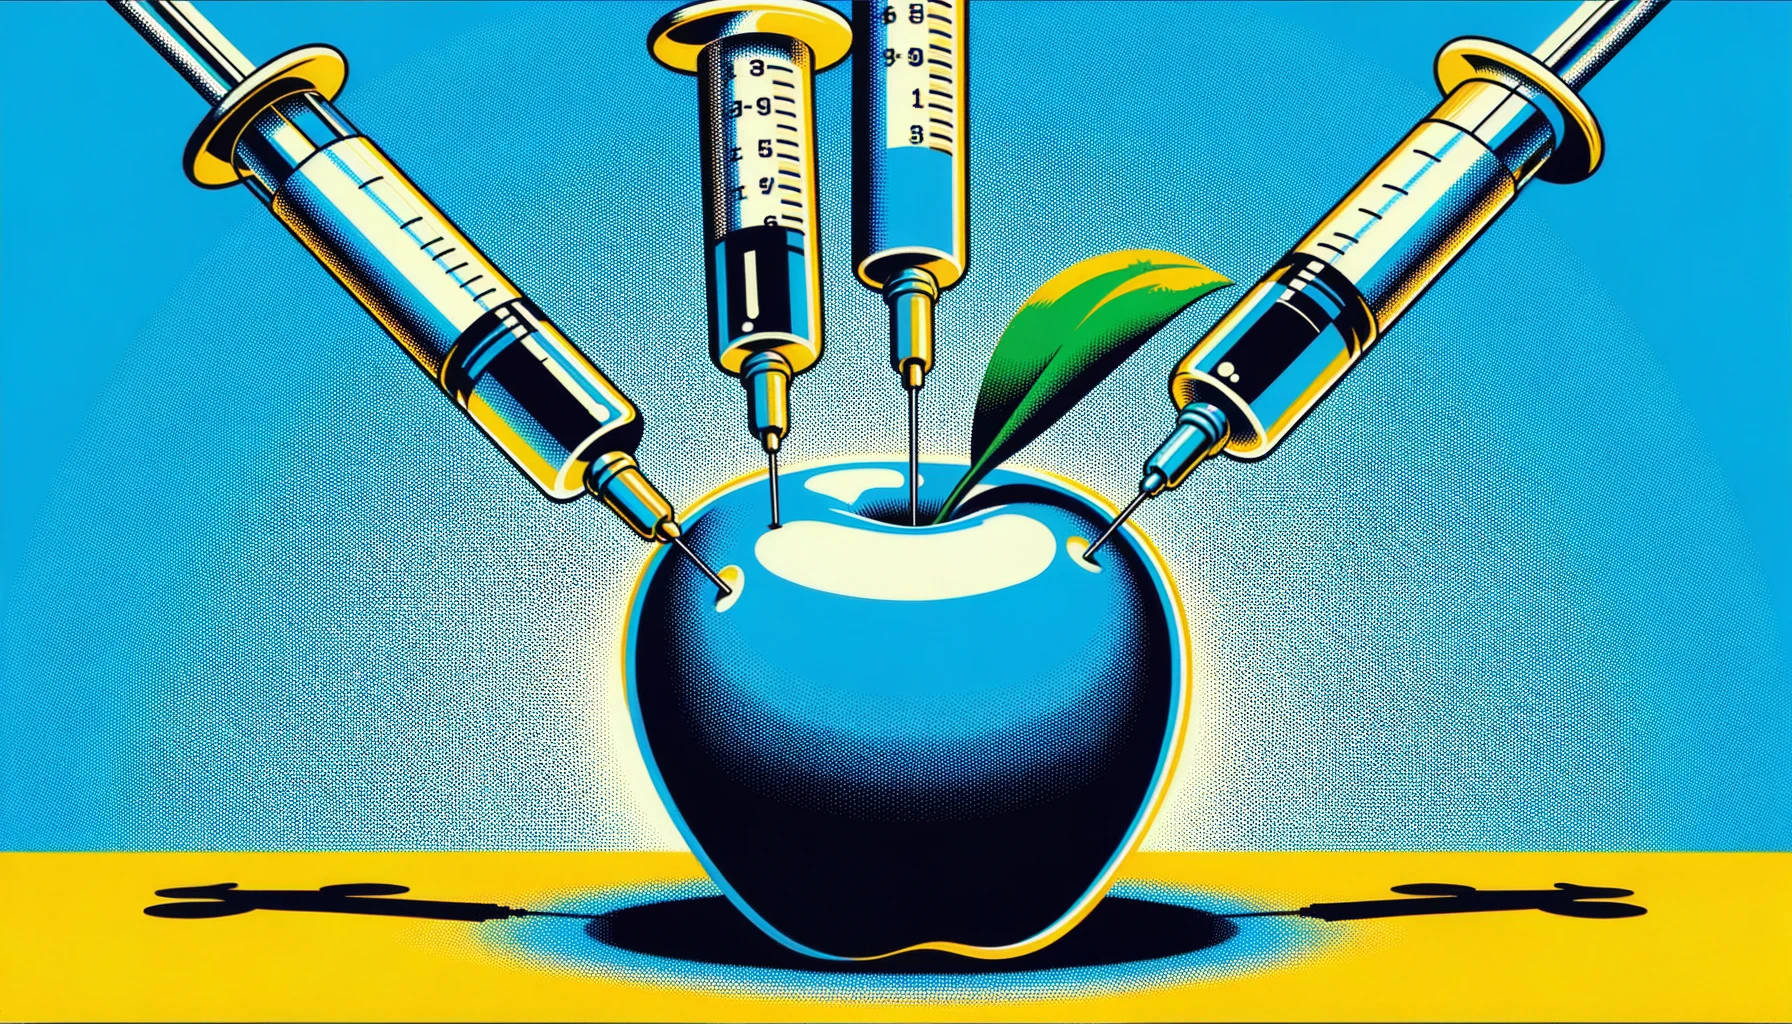 An AI generated hero image showing four syringes stuck into an apple, symbolifying the act of injecting dependencies on Apple platforms